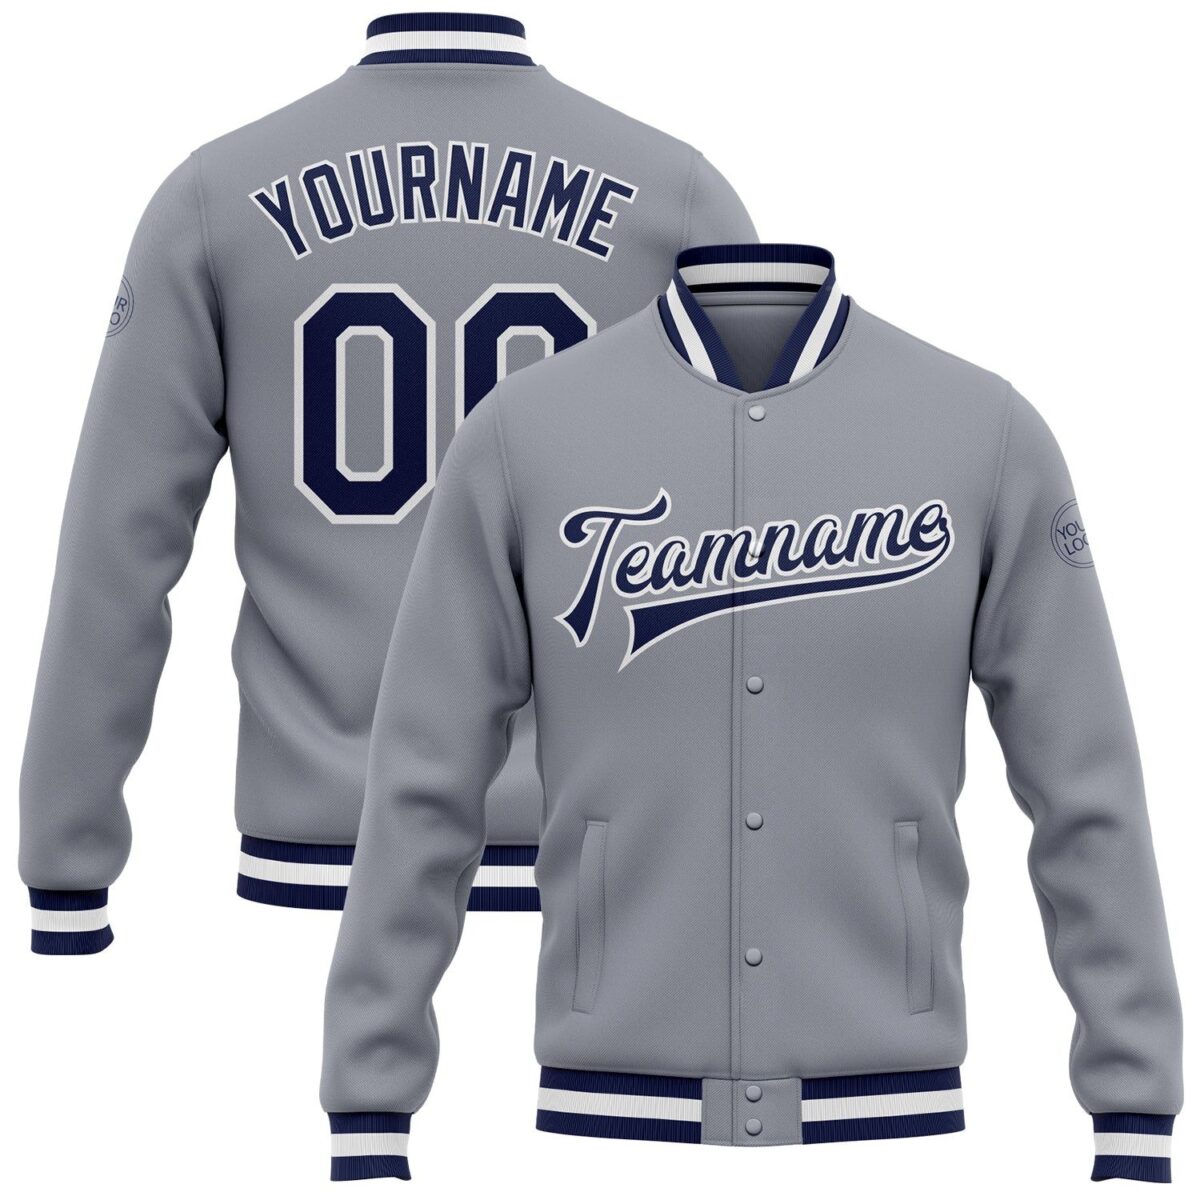 College Baseball Jackets with Grey & Navy 1